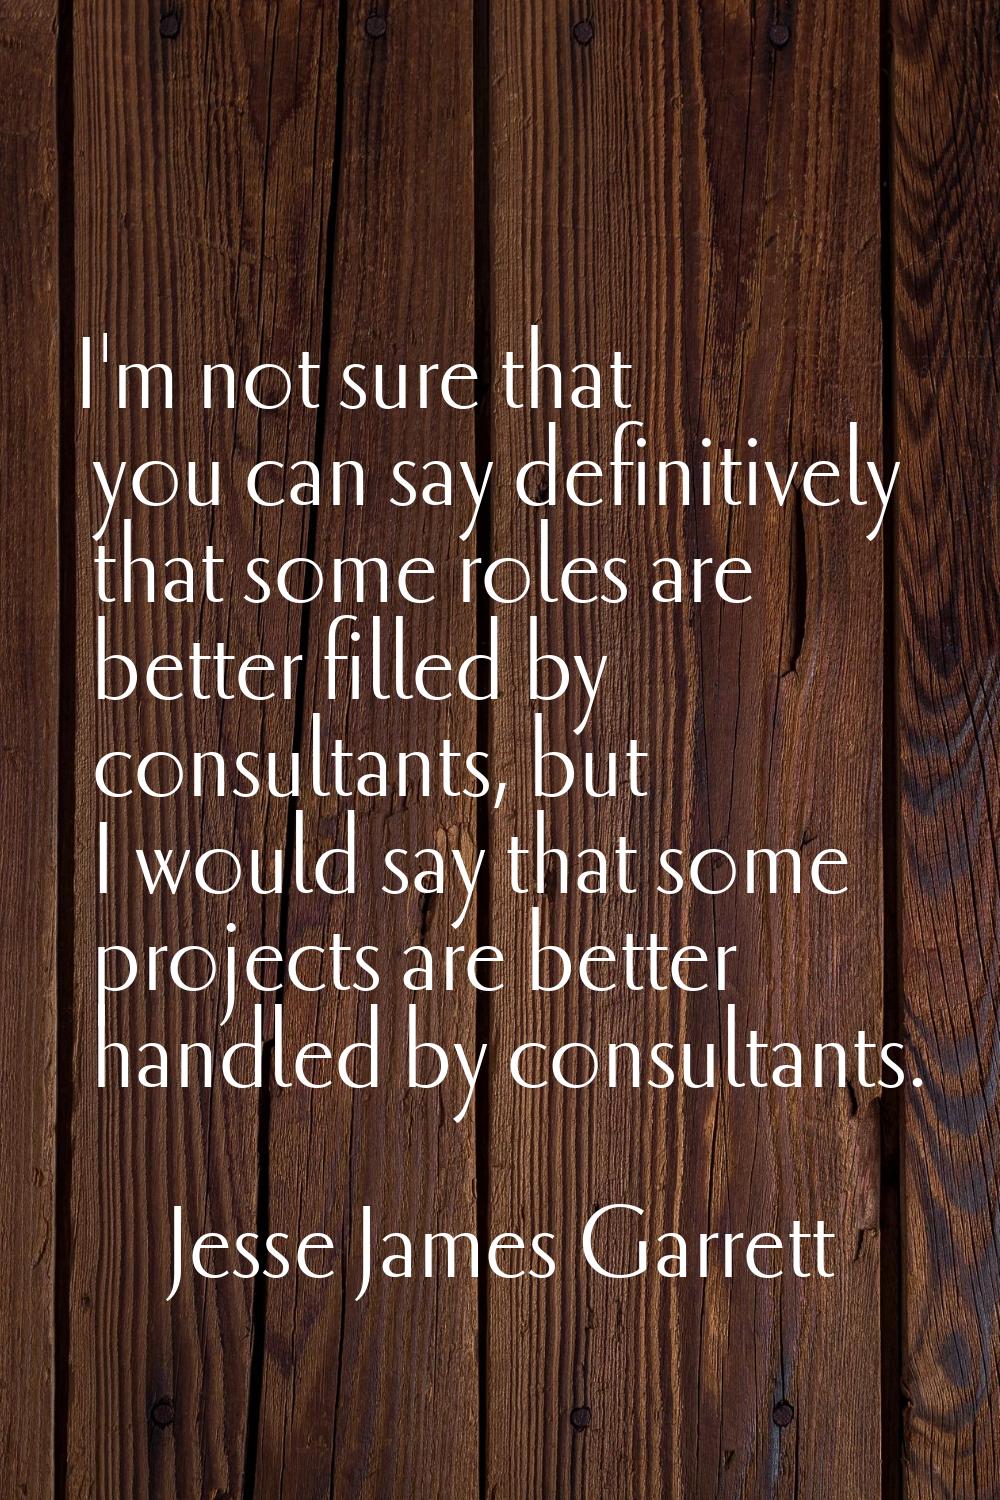 I'm not sure that you can say definitively that some roles are better filled by consultants, but I 